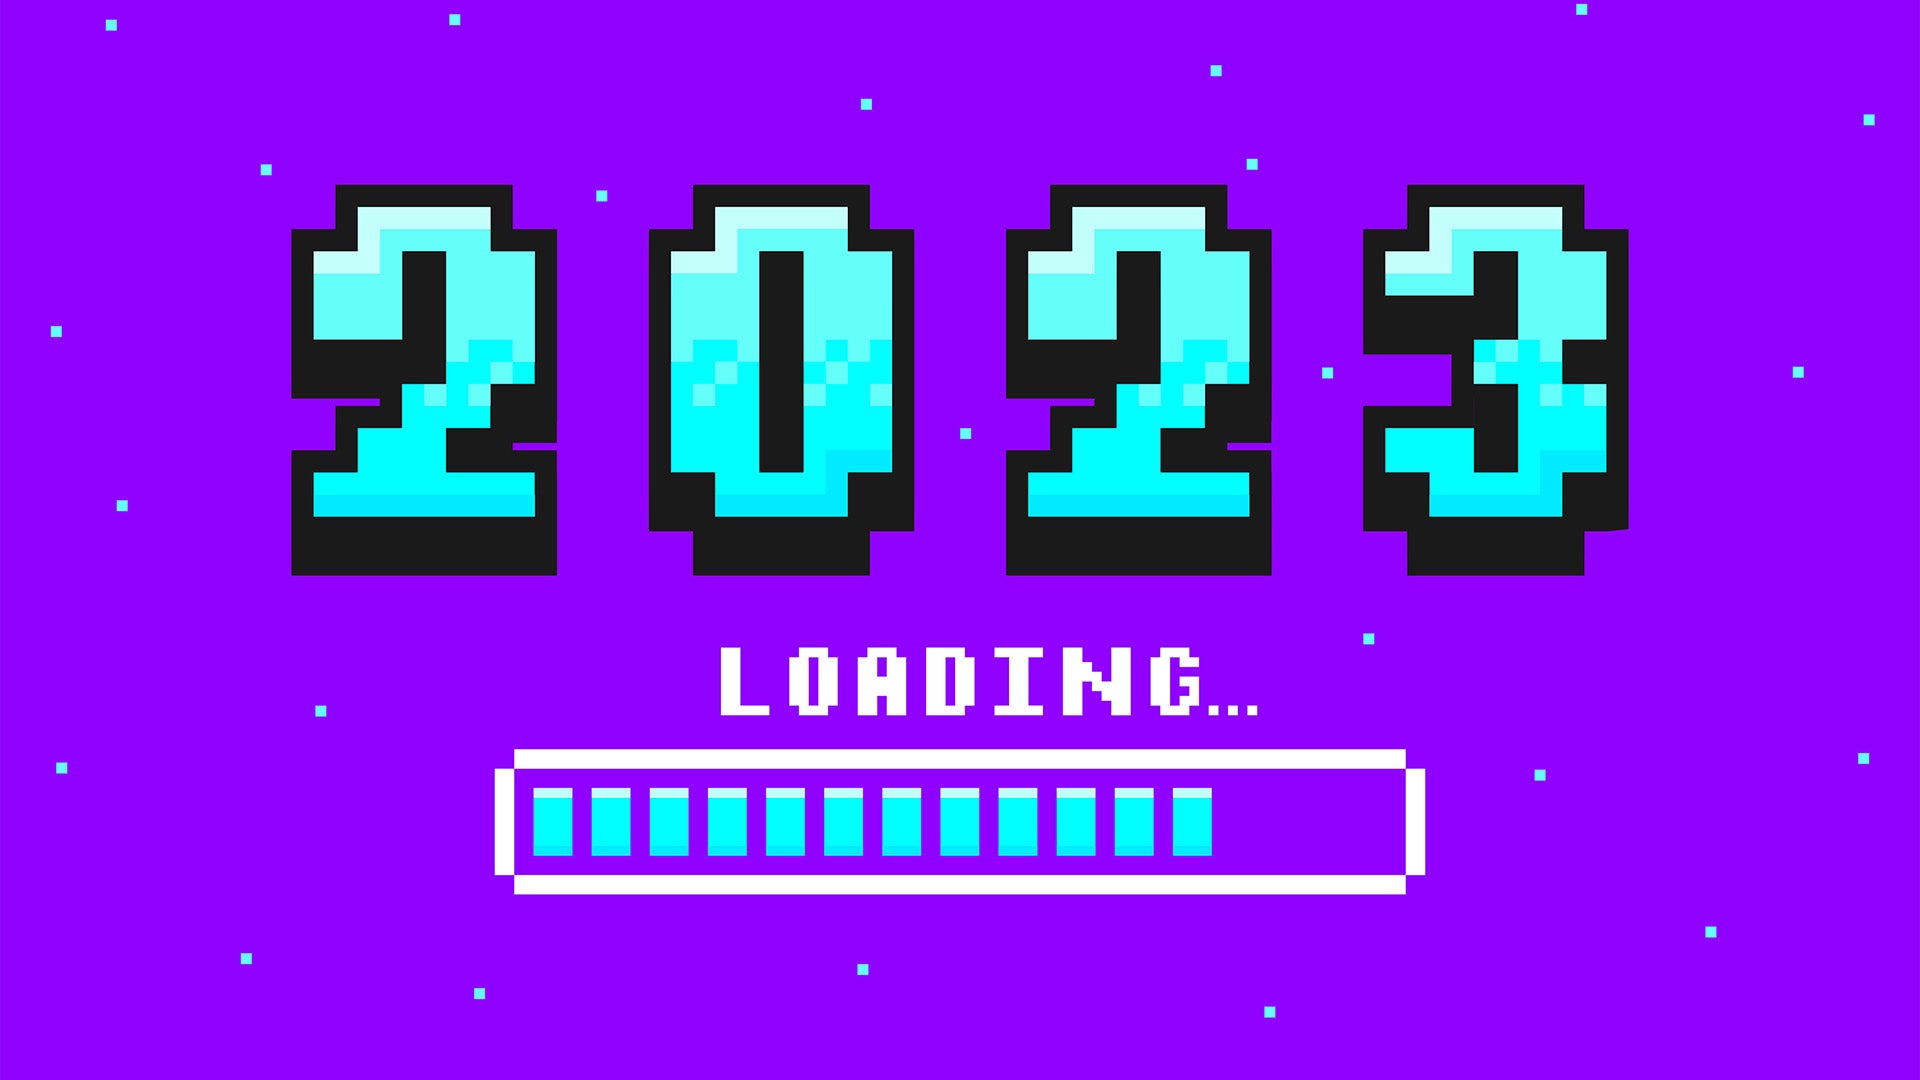 2023 displayed in a pixelated font with a retro loading bar underneath.